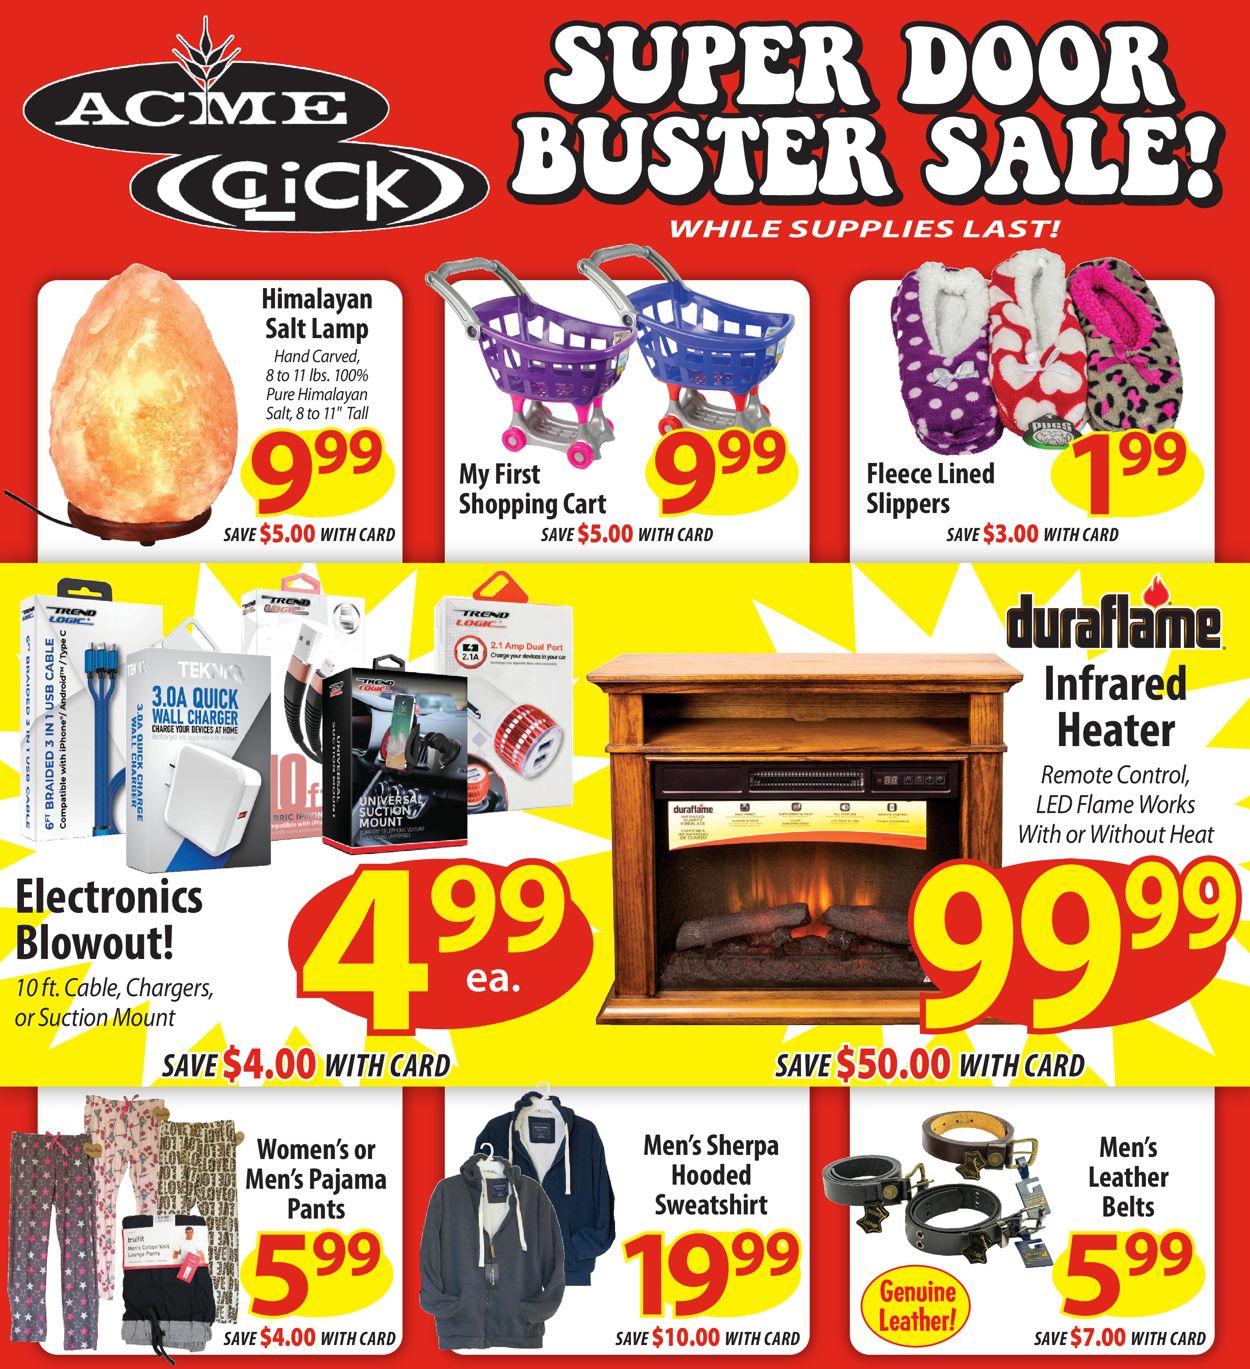 Acme Fresh Market Ad from 10/01/2020